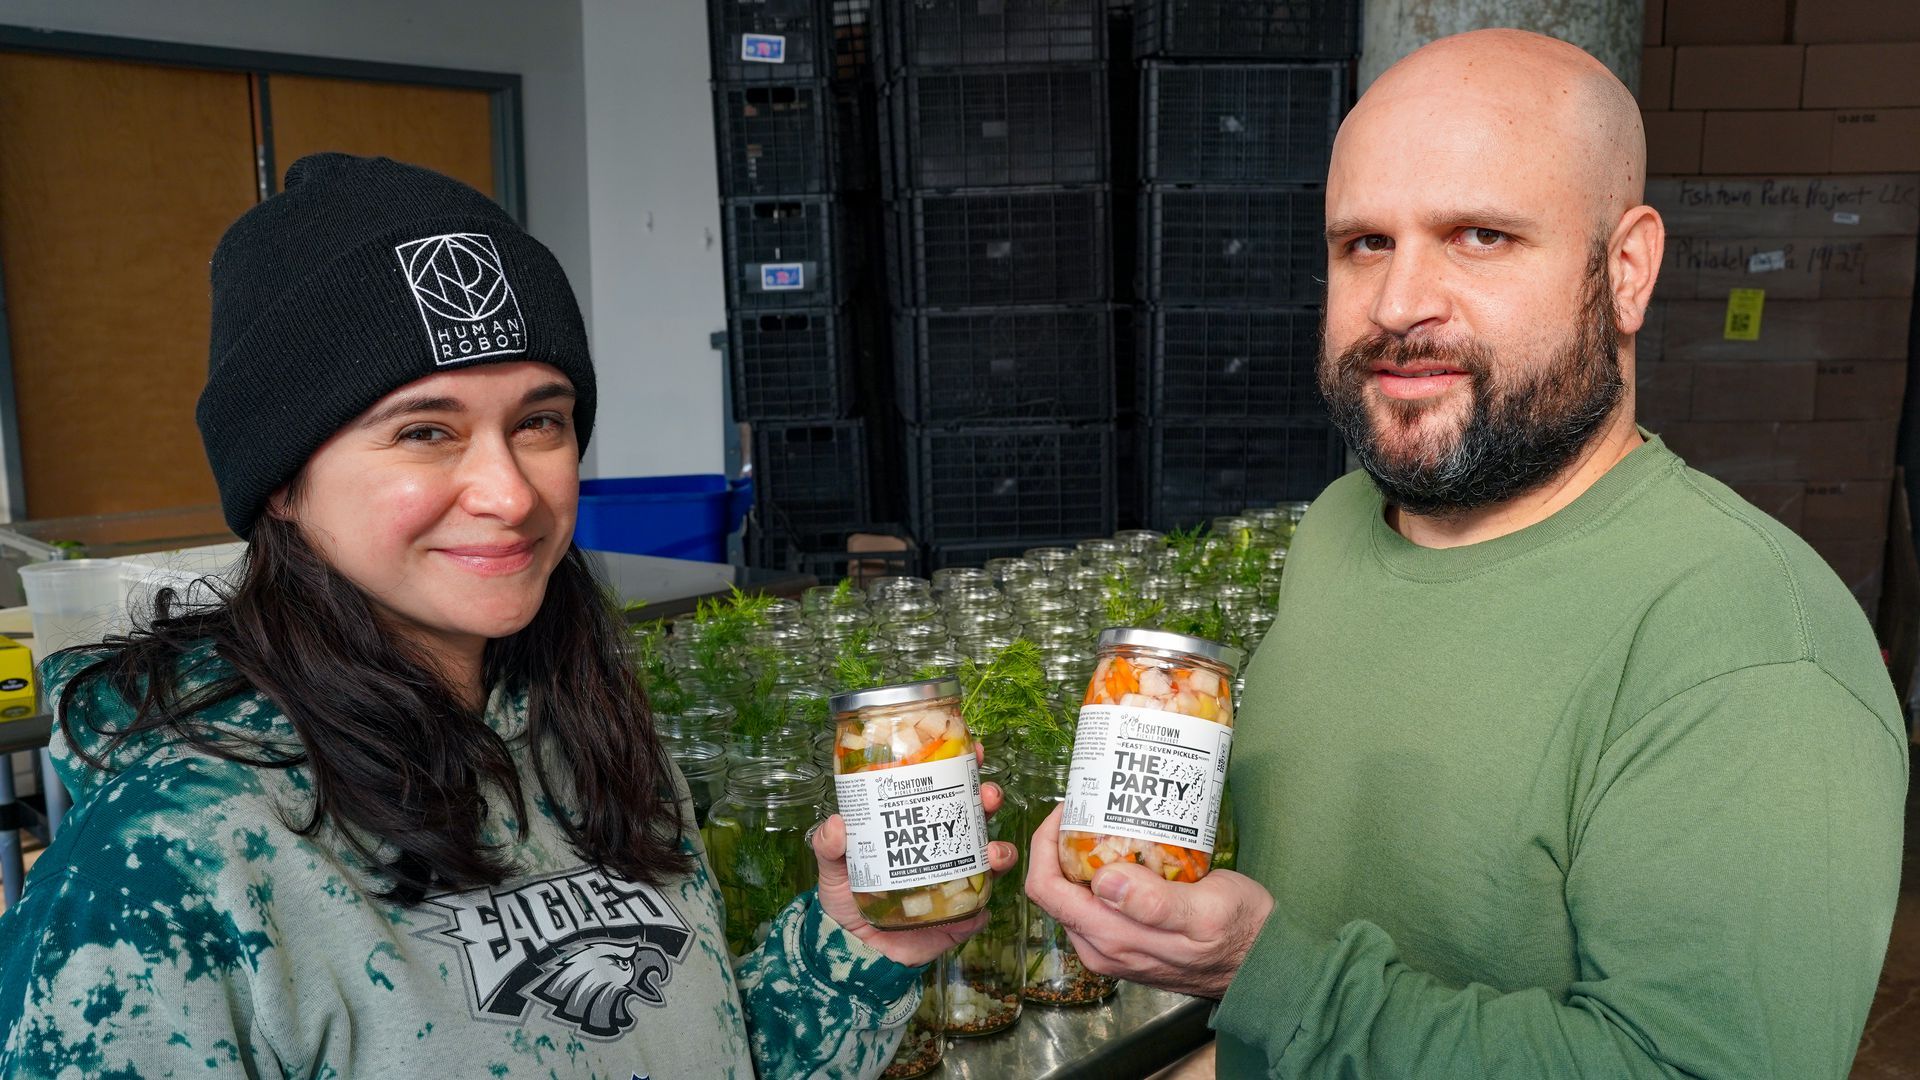 Niki Toscani and Mike Sicinski holding two jars of Fishtown Pickle Project Party Mix.